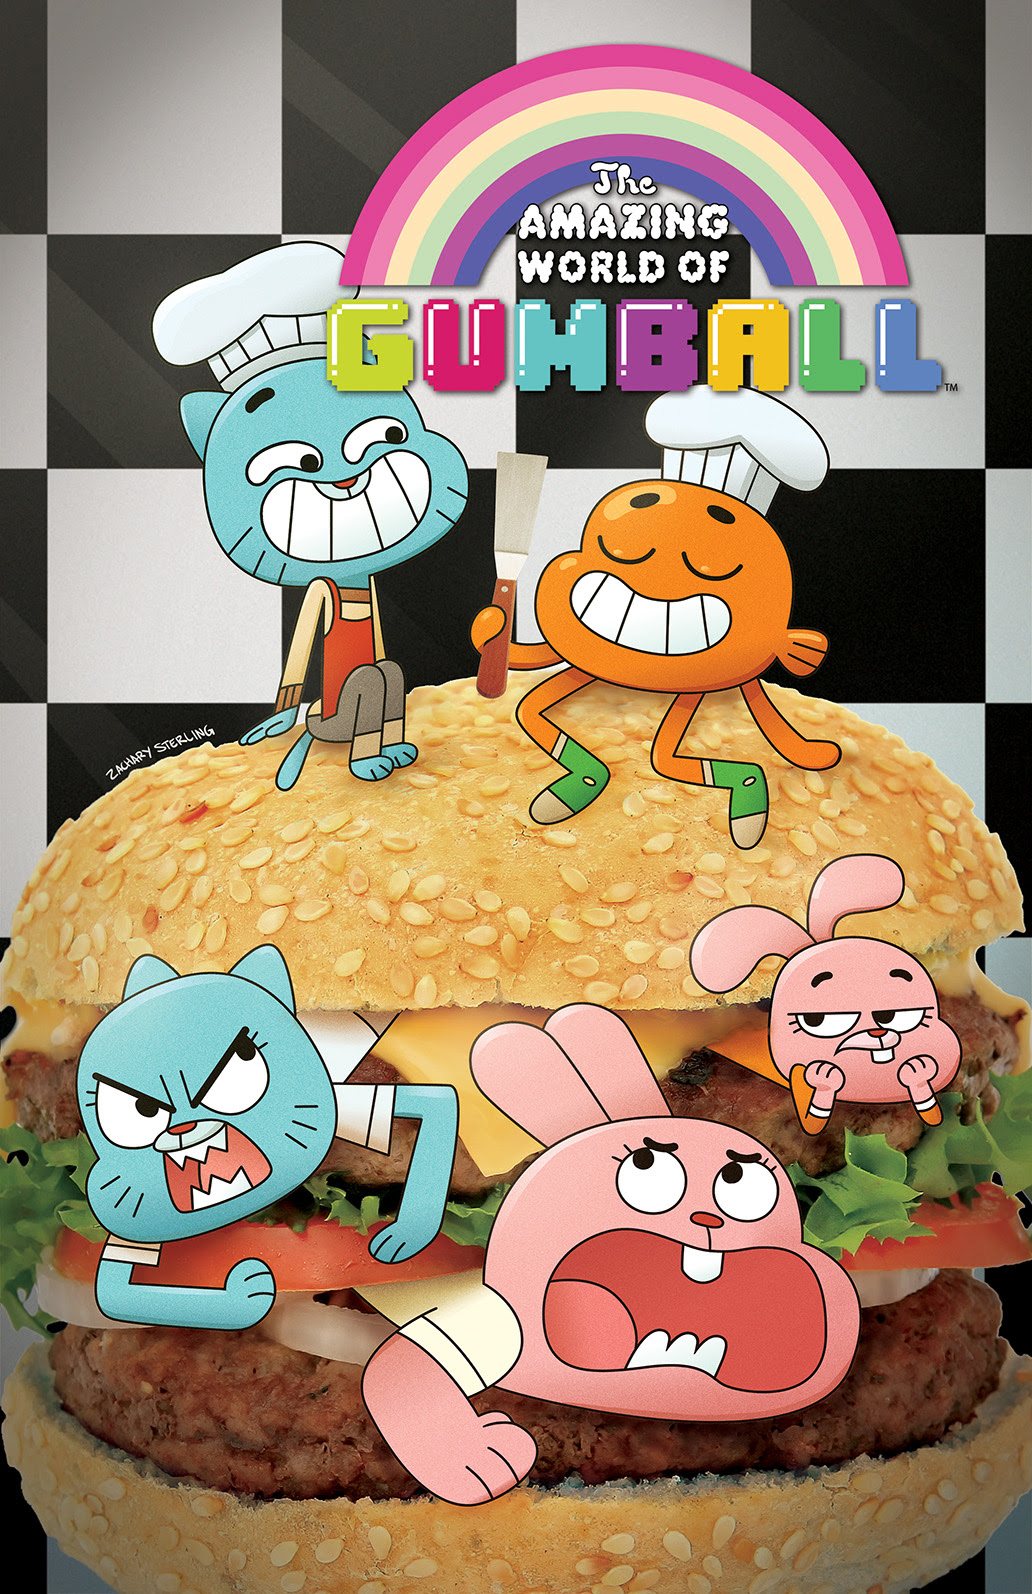 THE AMAZING WORLD OF GUMBALL #1 Cover B by Zachary Sterling